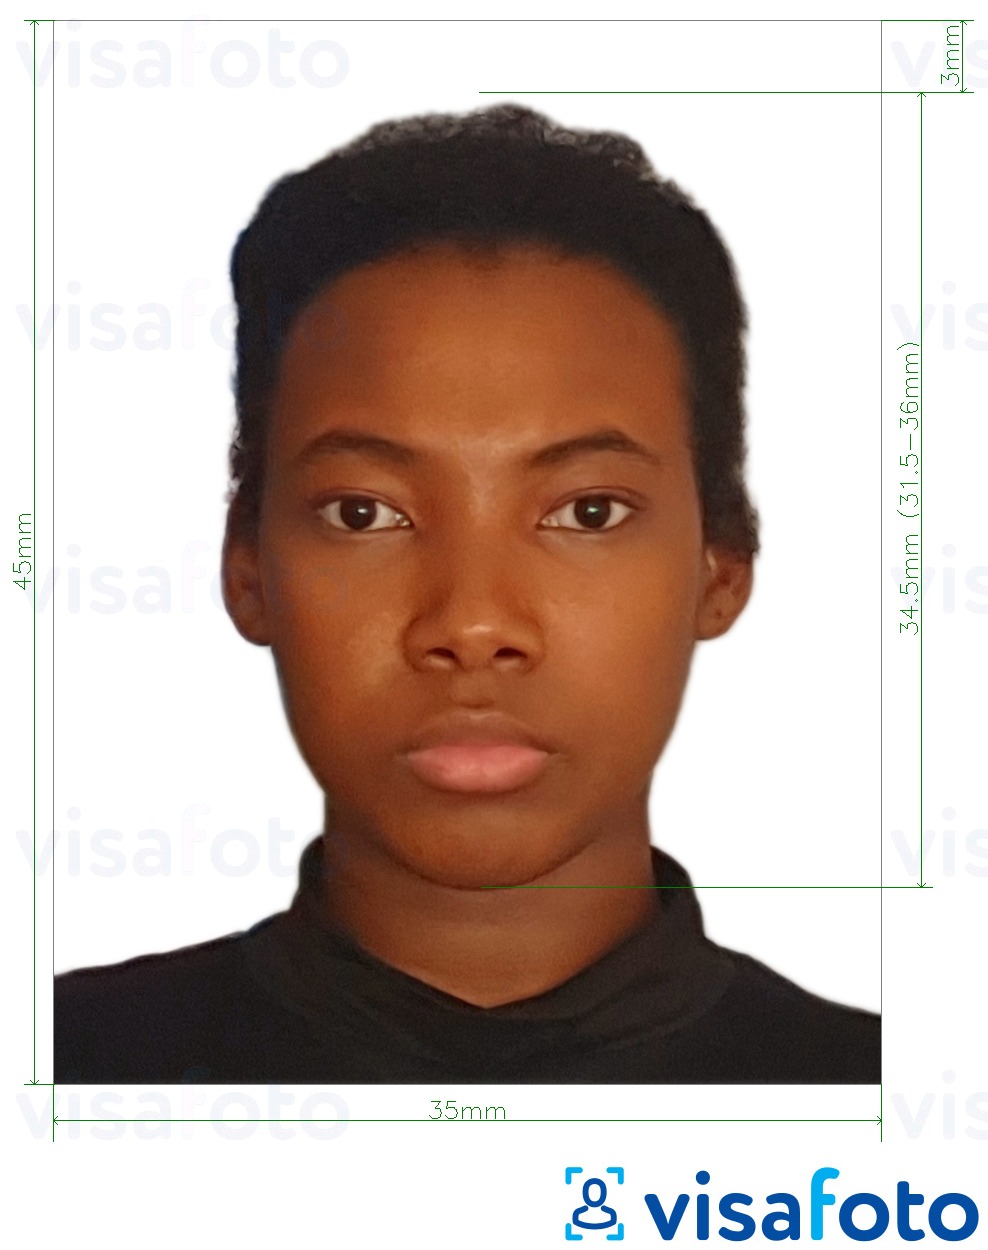 Example of photo for Nigeria visa 3.5x4.5 cm (35x45 mm) with exact size specification